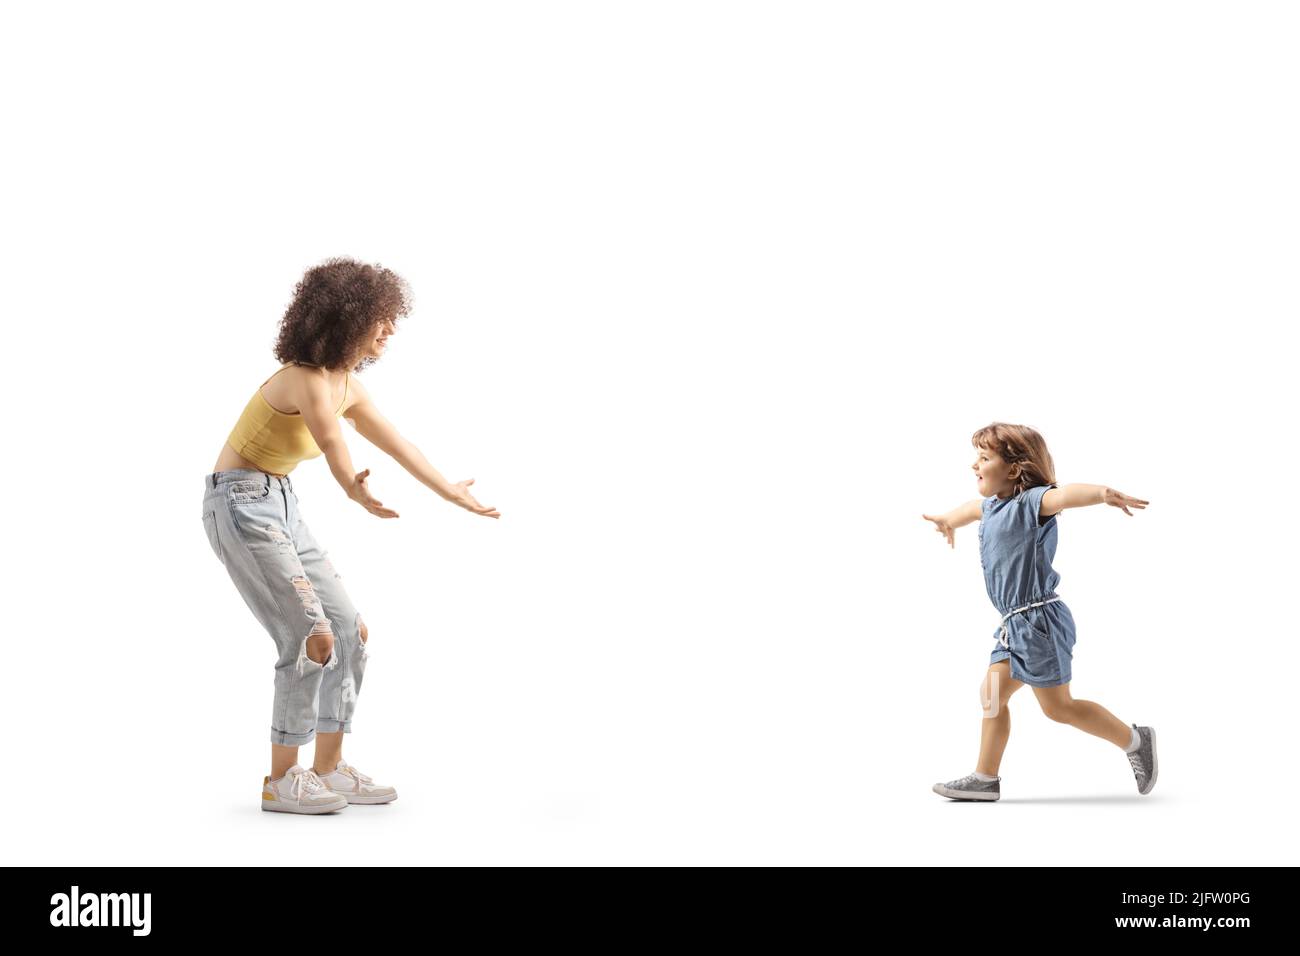 Full length profile shot of a little girl running towards a young female with curly afro hairstyle isolated on white background Stock Photo